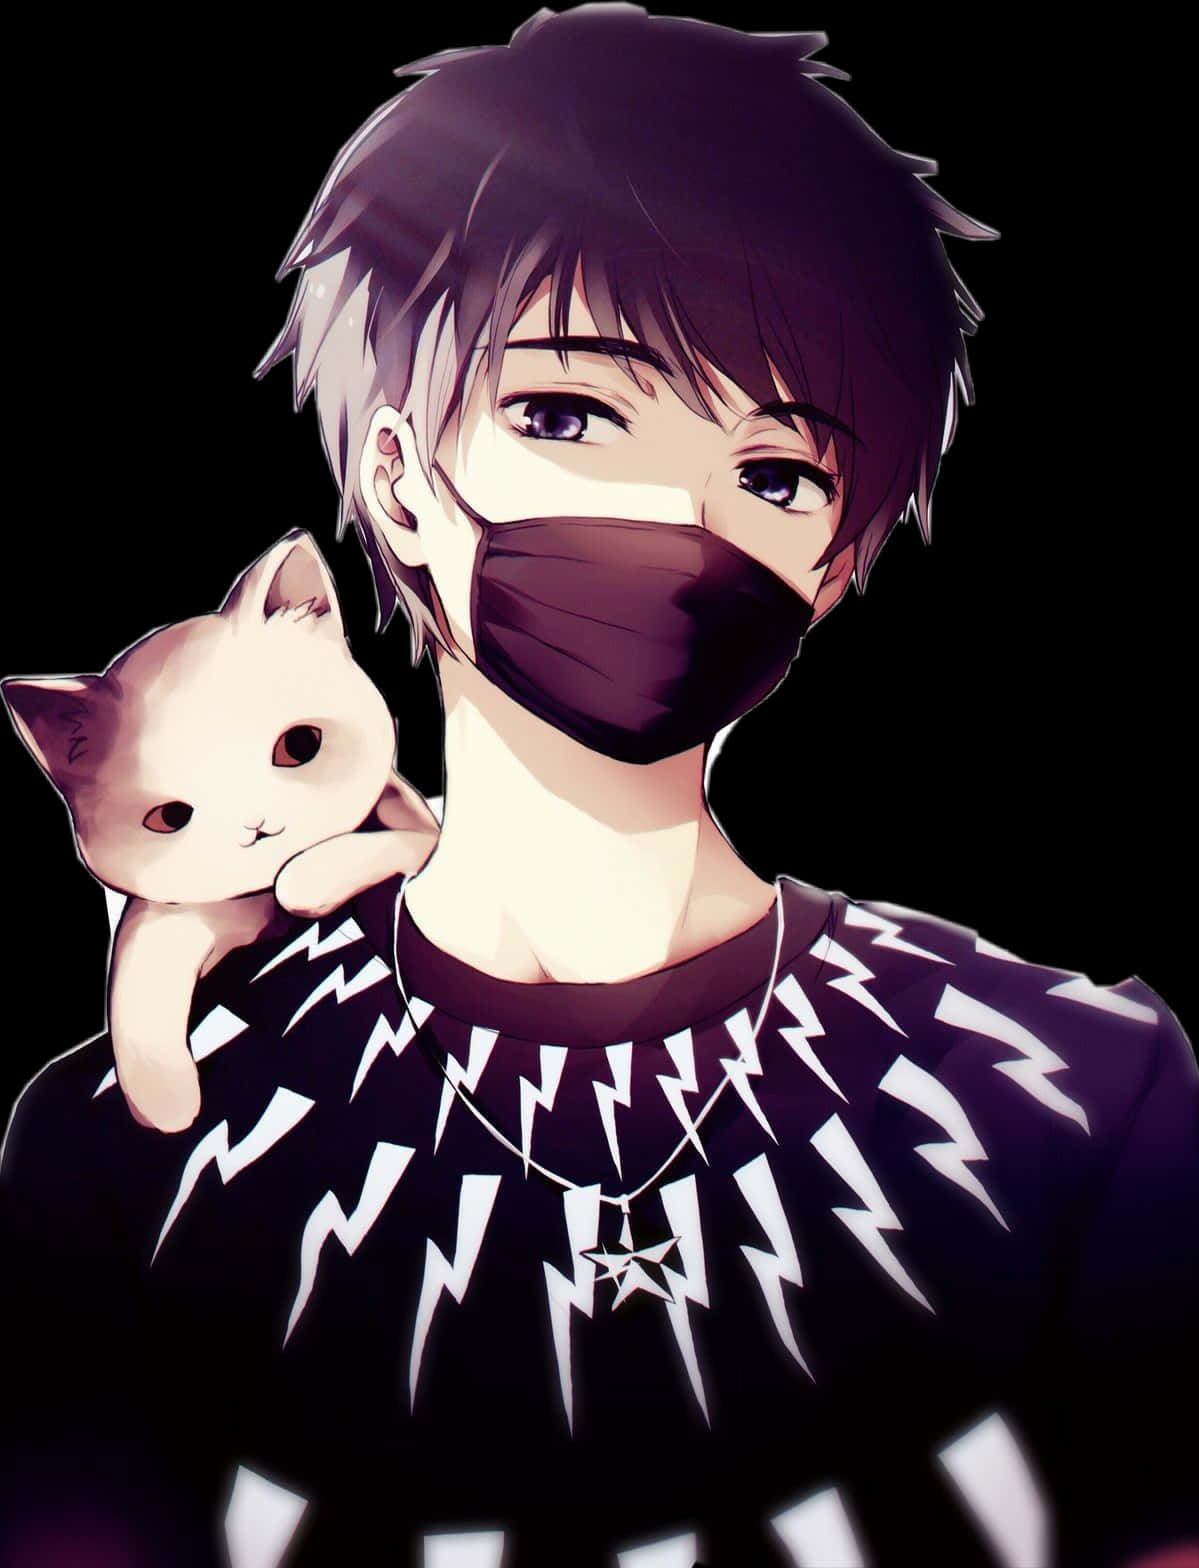 Mask Boy Kpop Anime With Cat Wallpaper